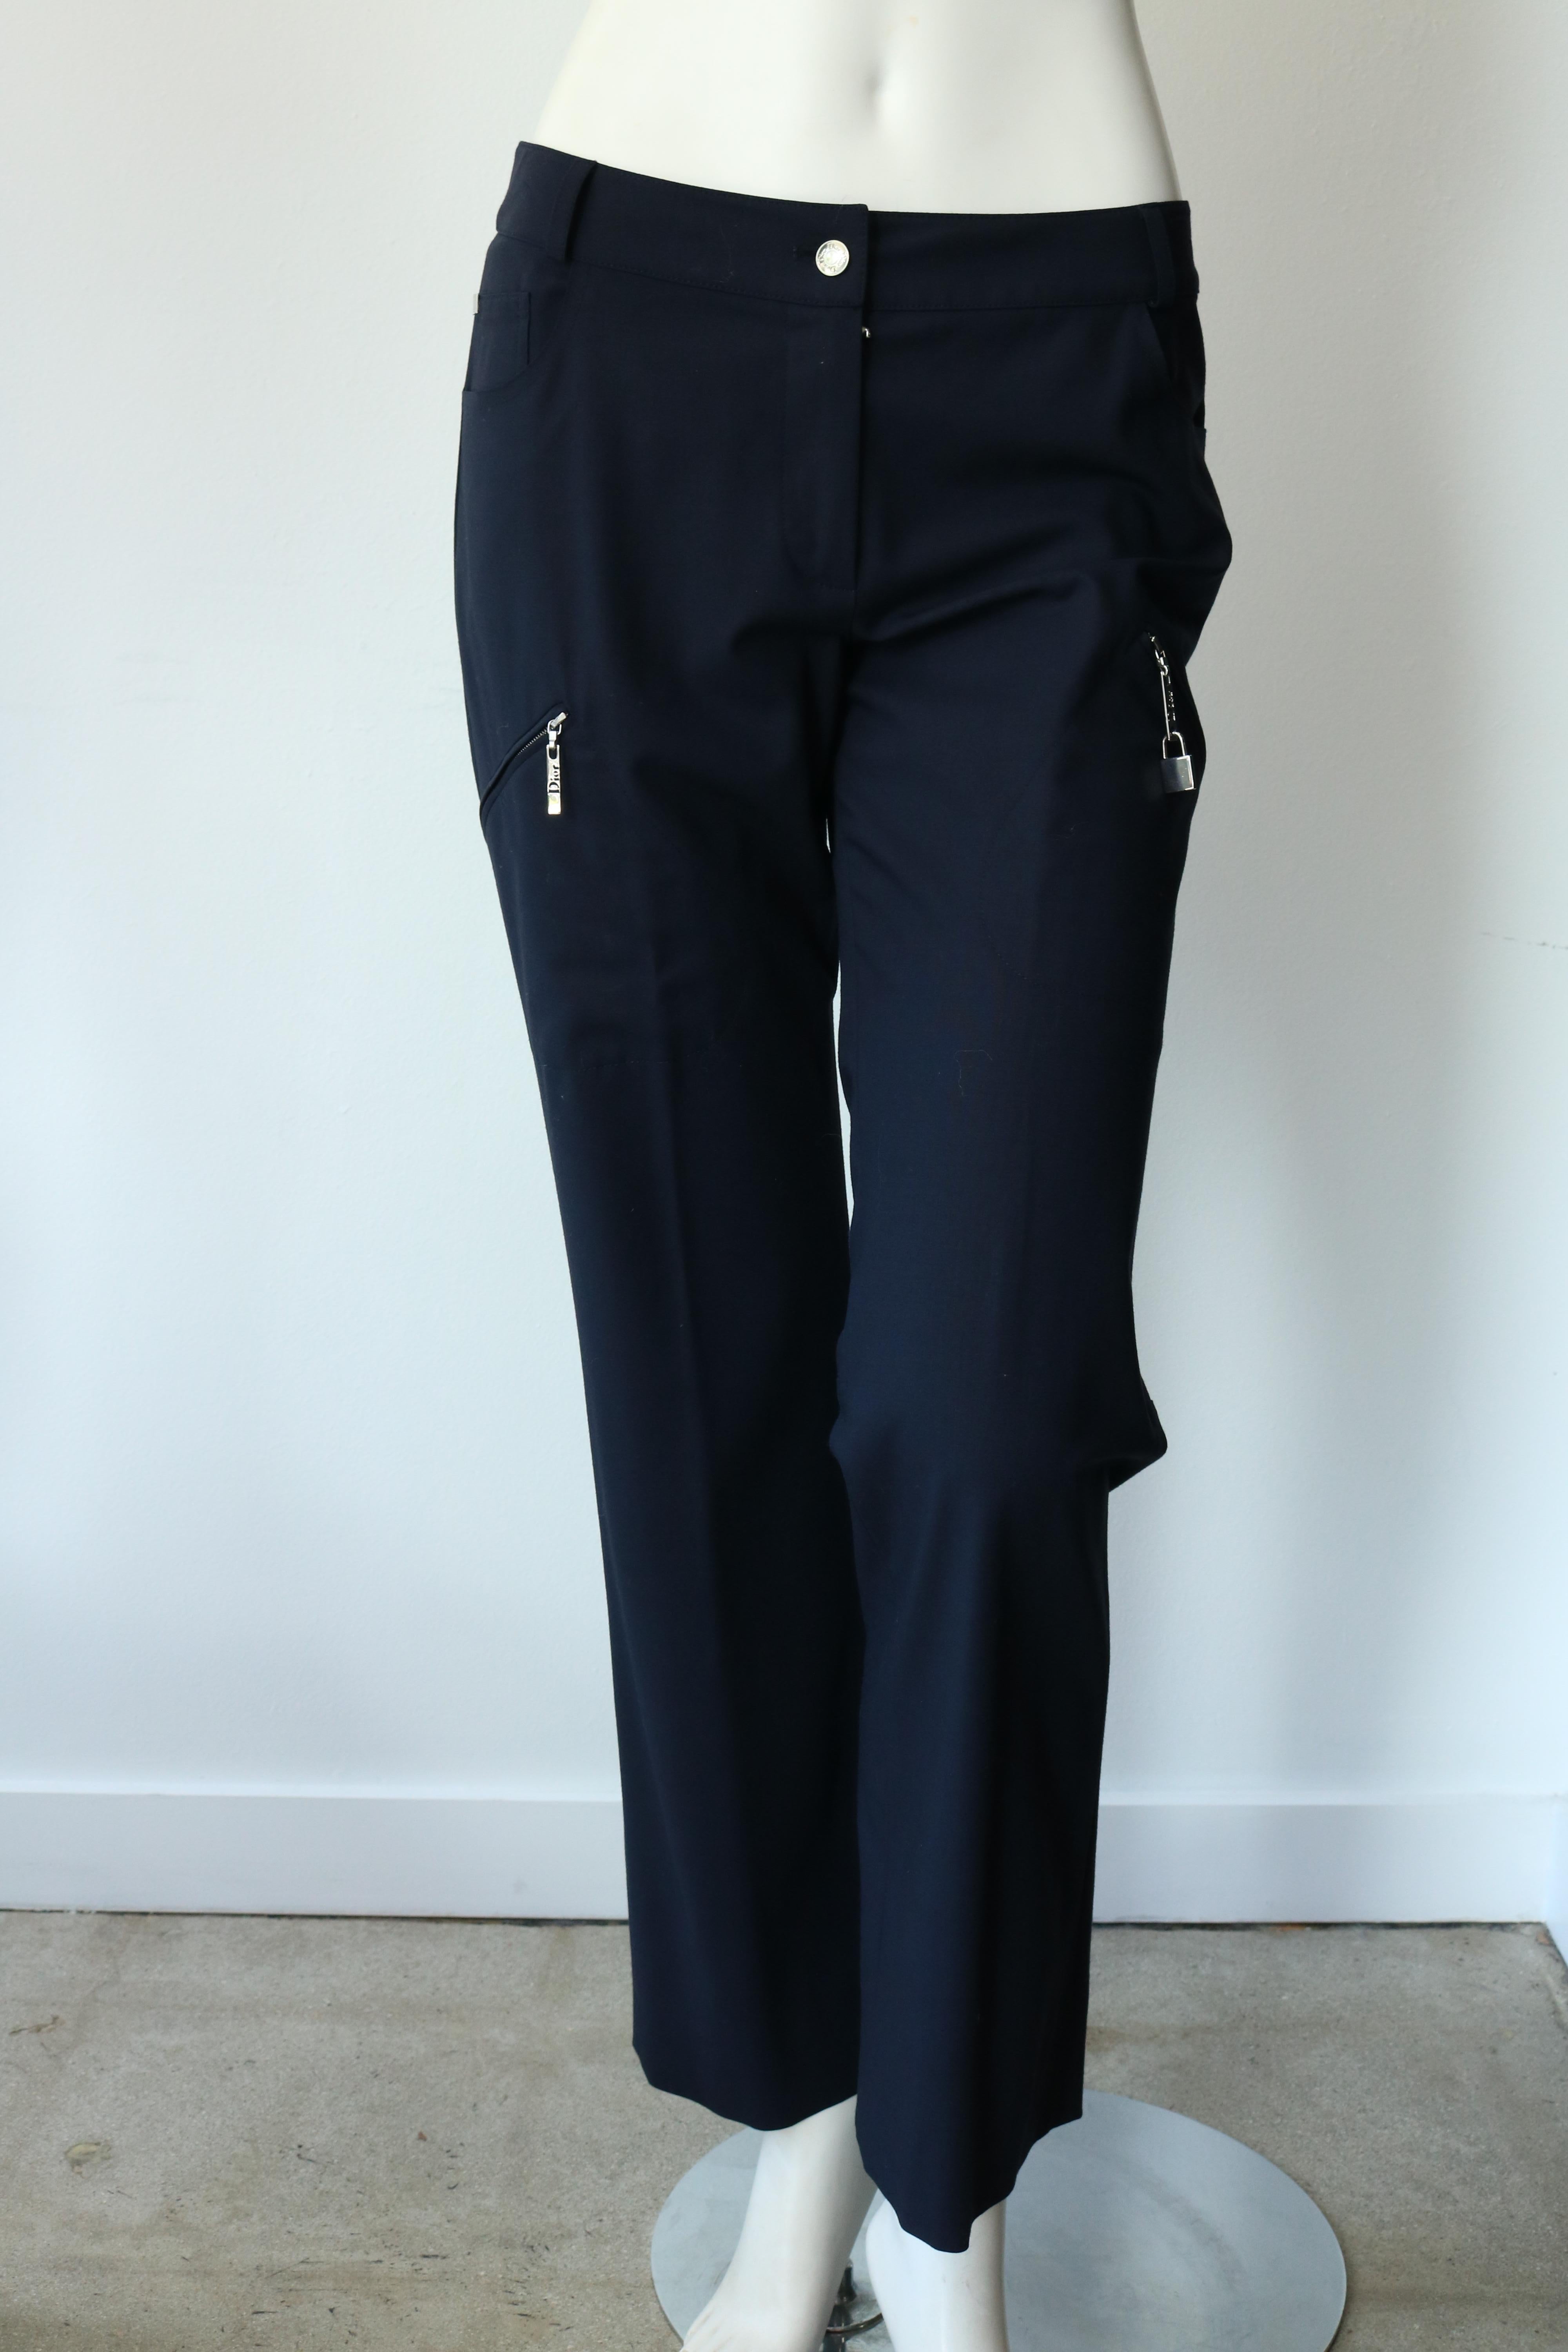 Christian Dior Navy Blue Jacket and Trouser Ensemble Size US 6  For Sale 8